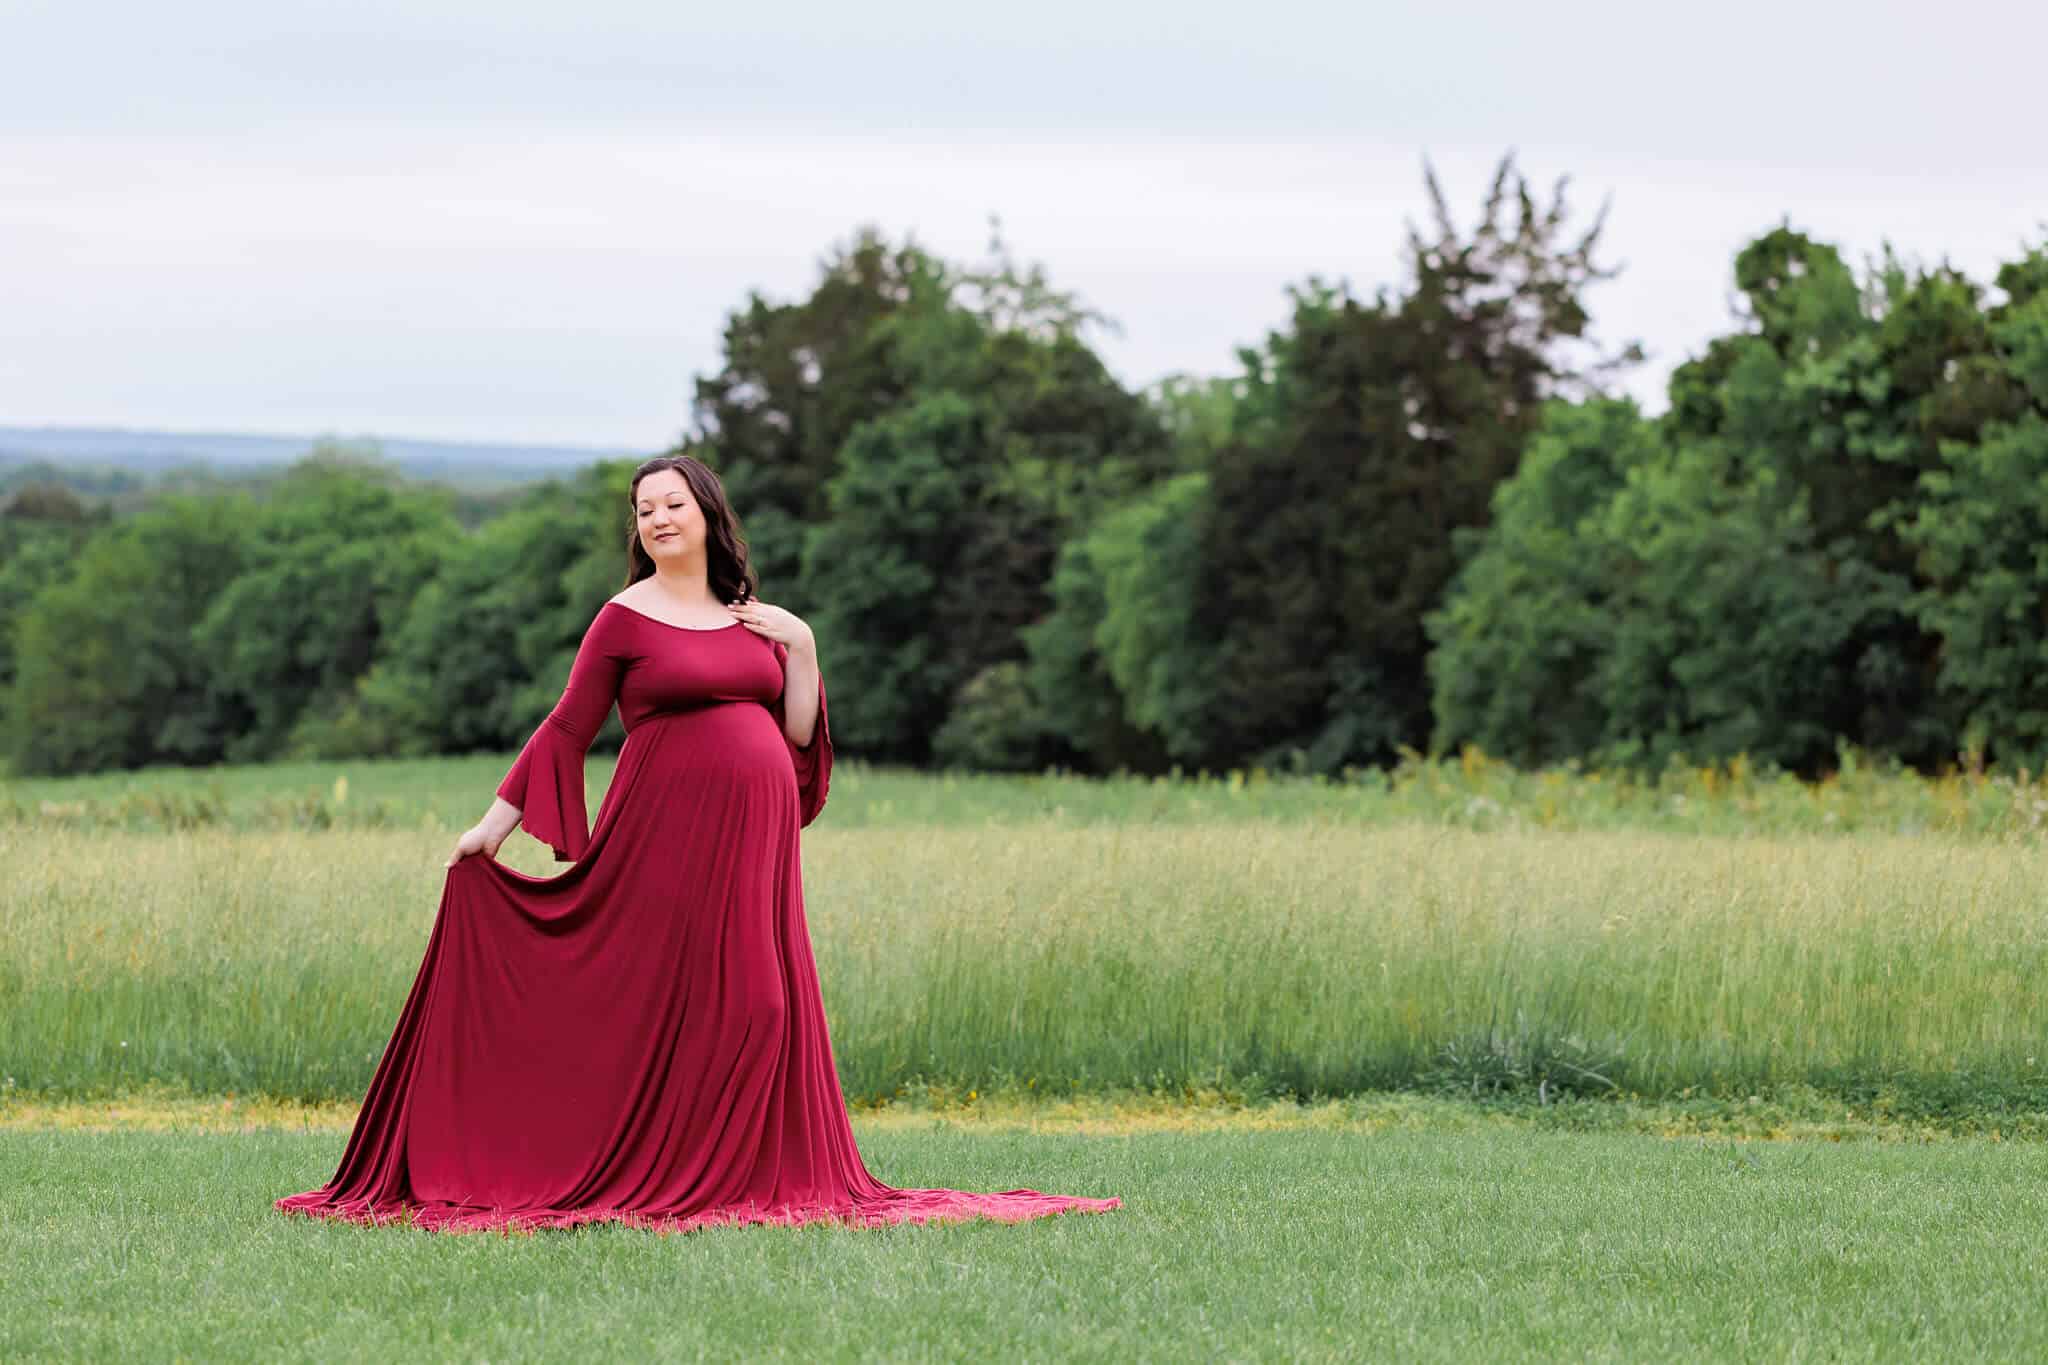 A mom-to-be in a field wearing a red dress and holding her train behind her, featured on a blog about Fairfax Home Birth.